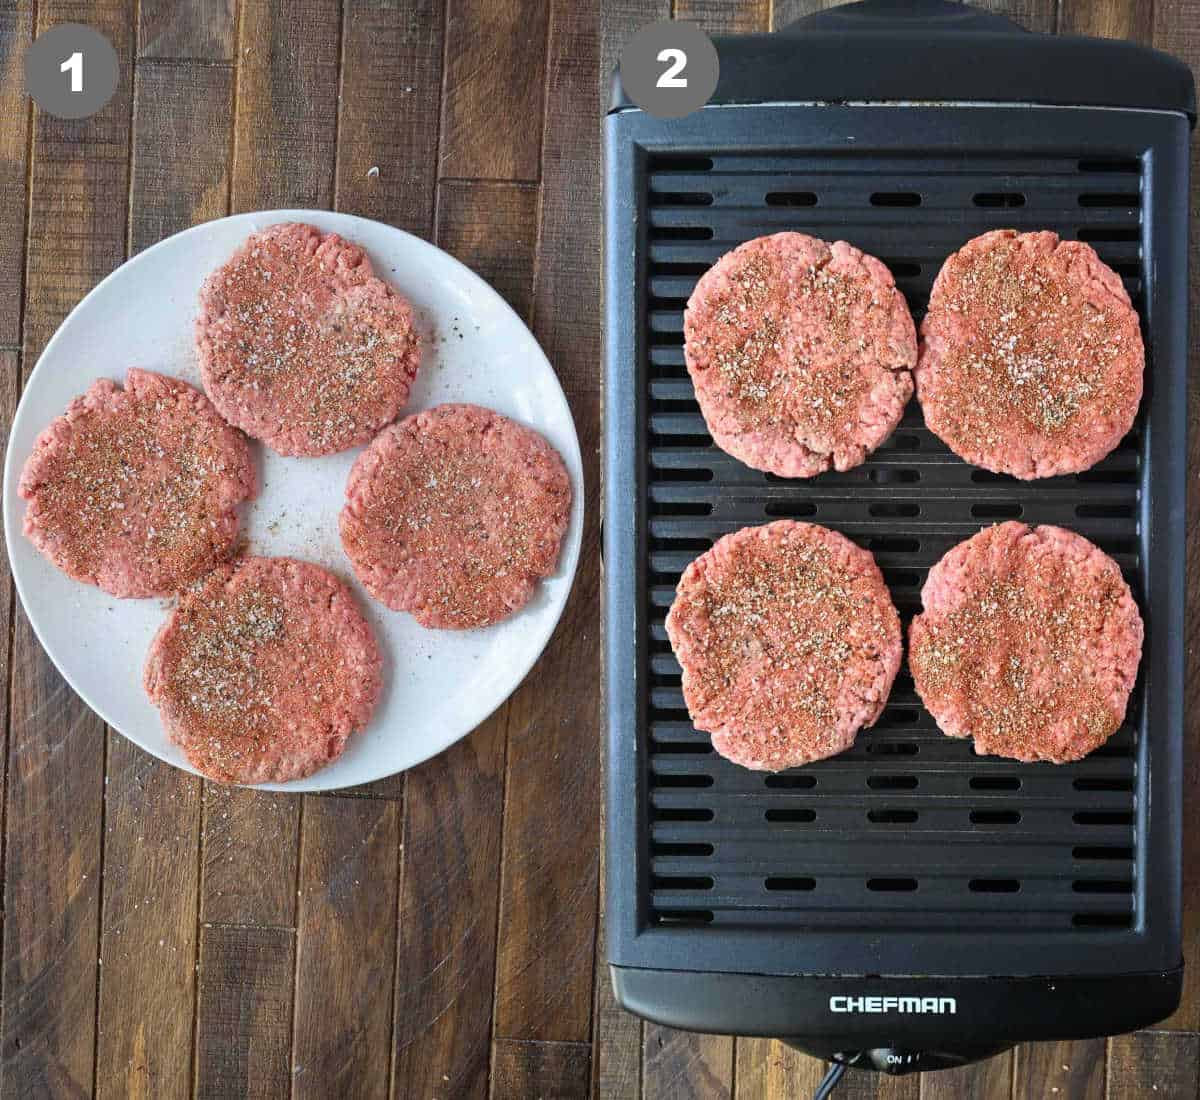 Raw burger patties on a white plate then placed on a grill.